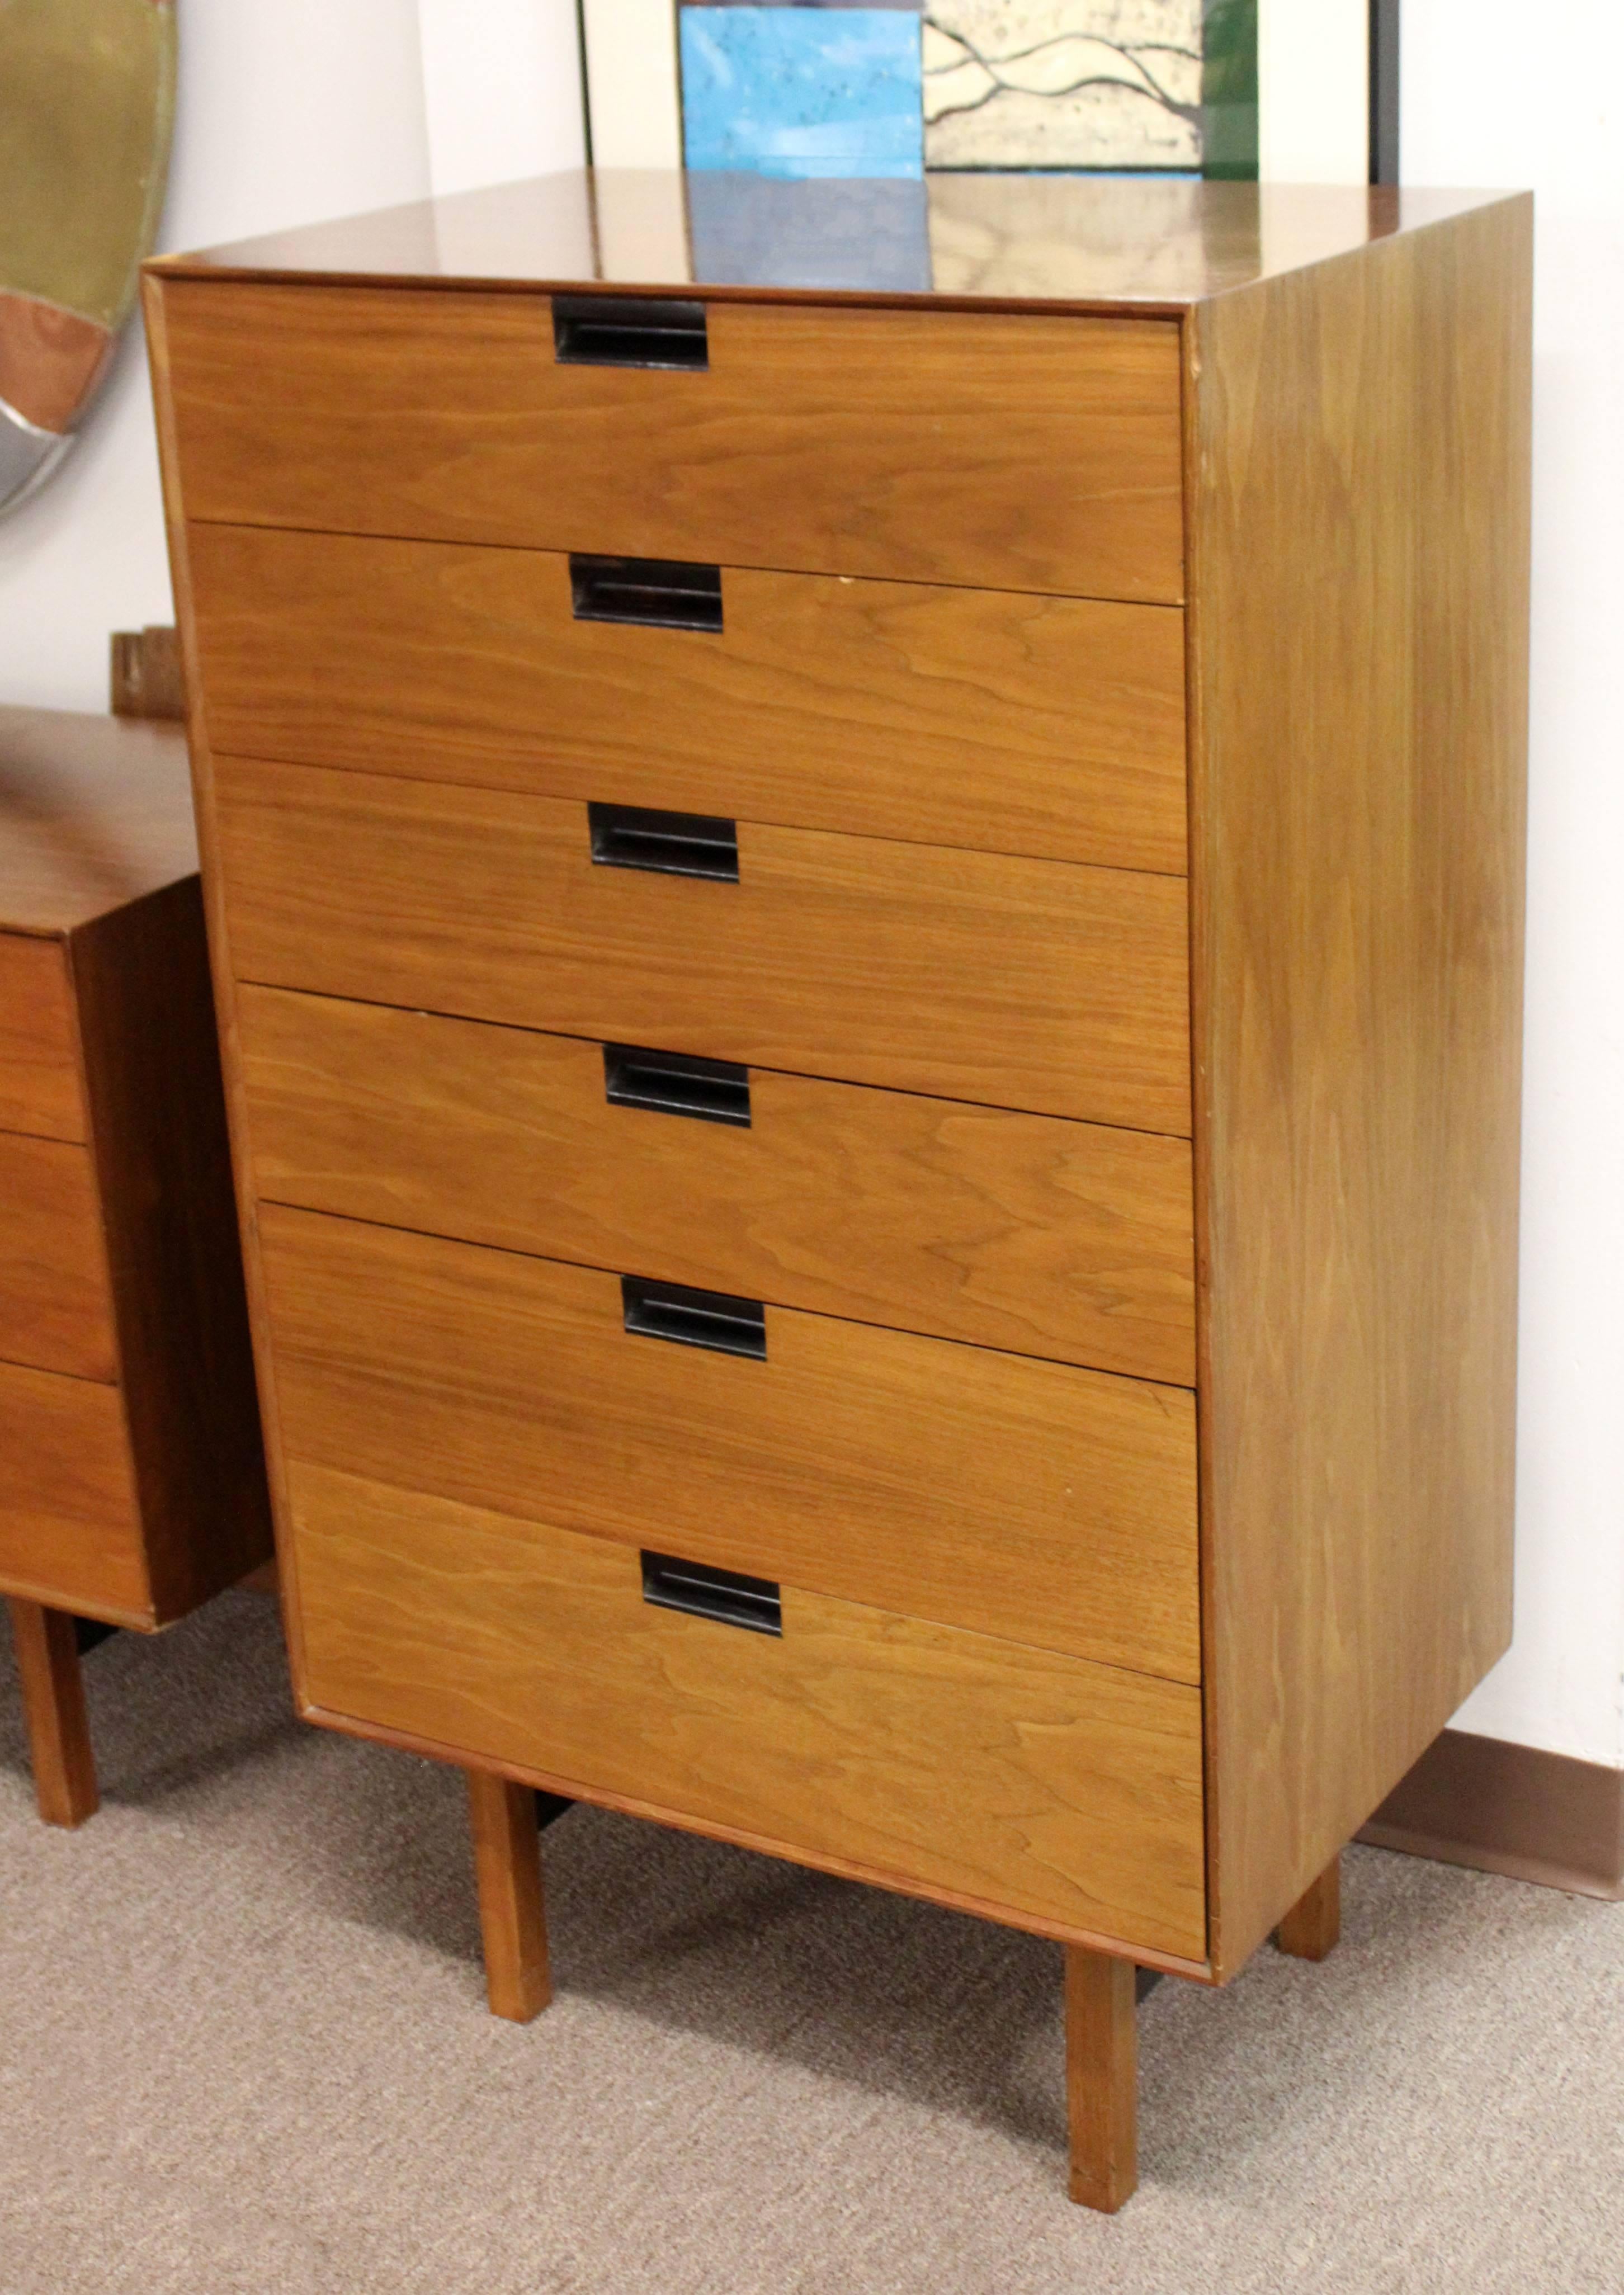 For your consideration is a magnificent, six drawer, highboy dresser, by Milo Baughman for Arch Gordon, circa the 1950s. In very good condition. The dimensions are 27